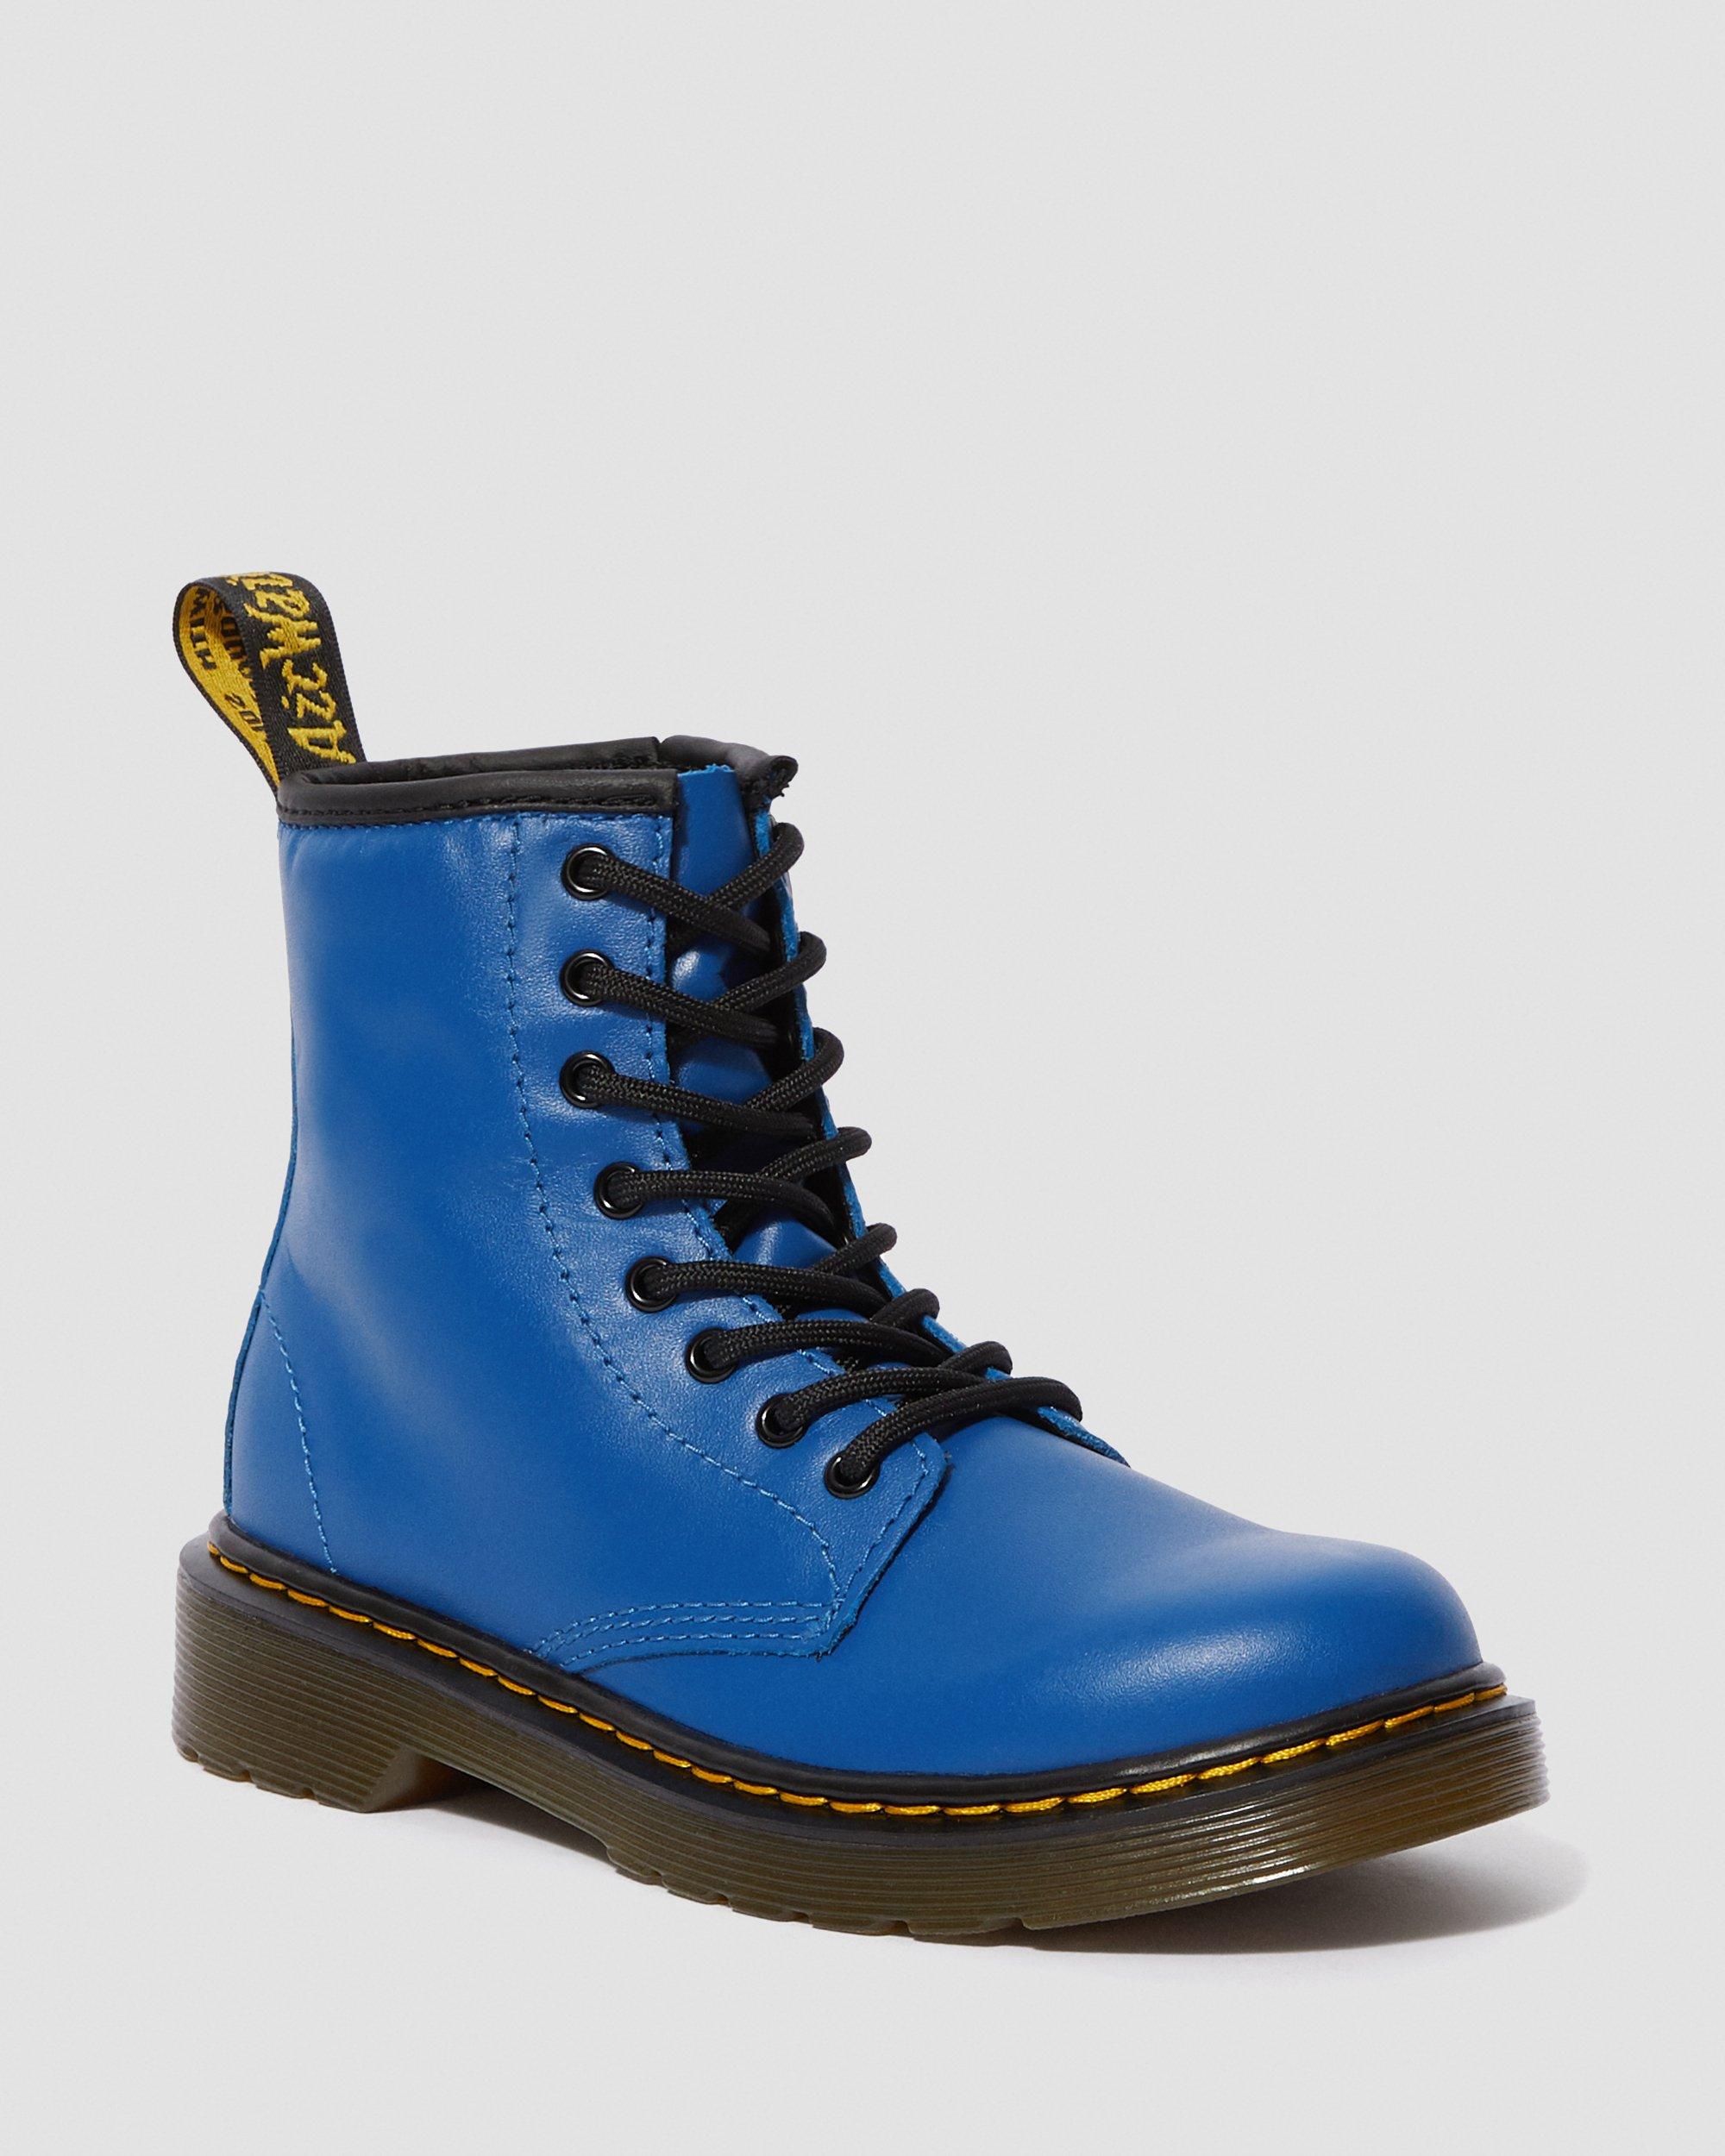 Junior 1460 Leather Lace Up Boots | Dr. Martens